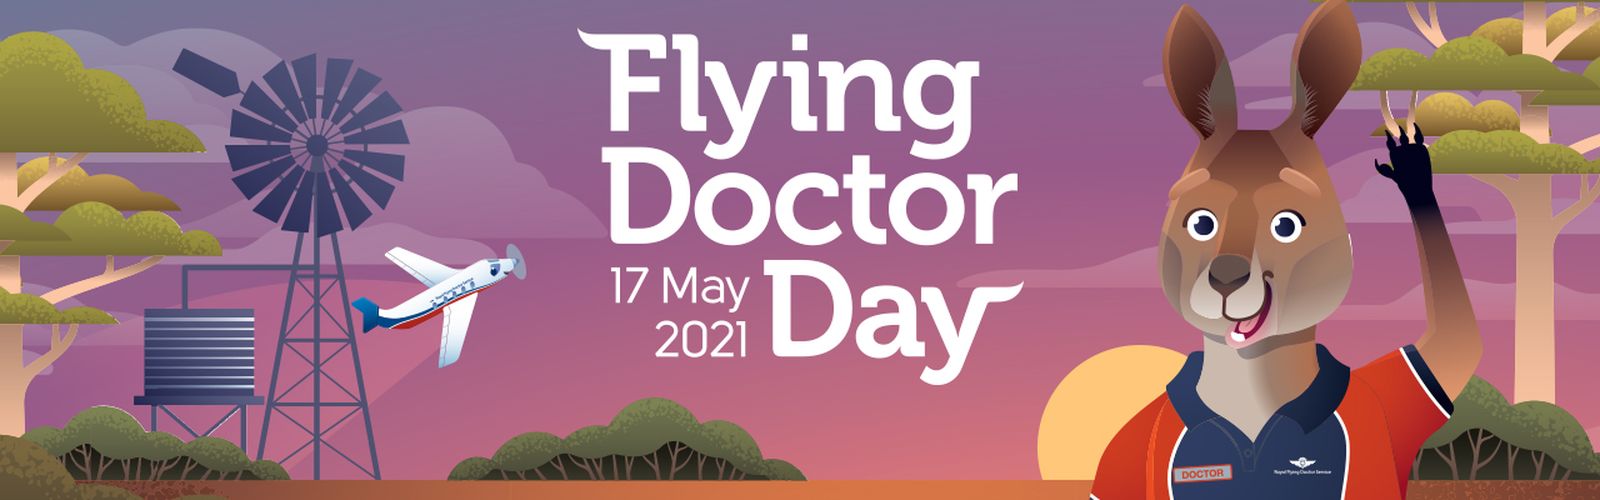 Flying Doctor Day 2021 